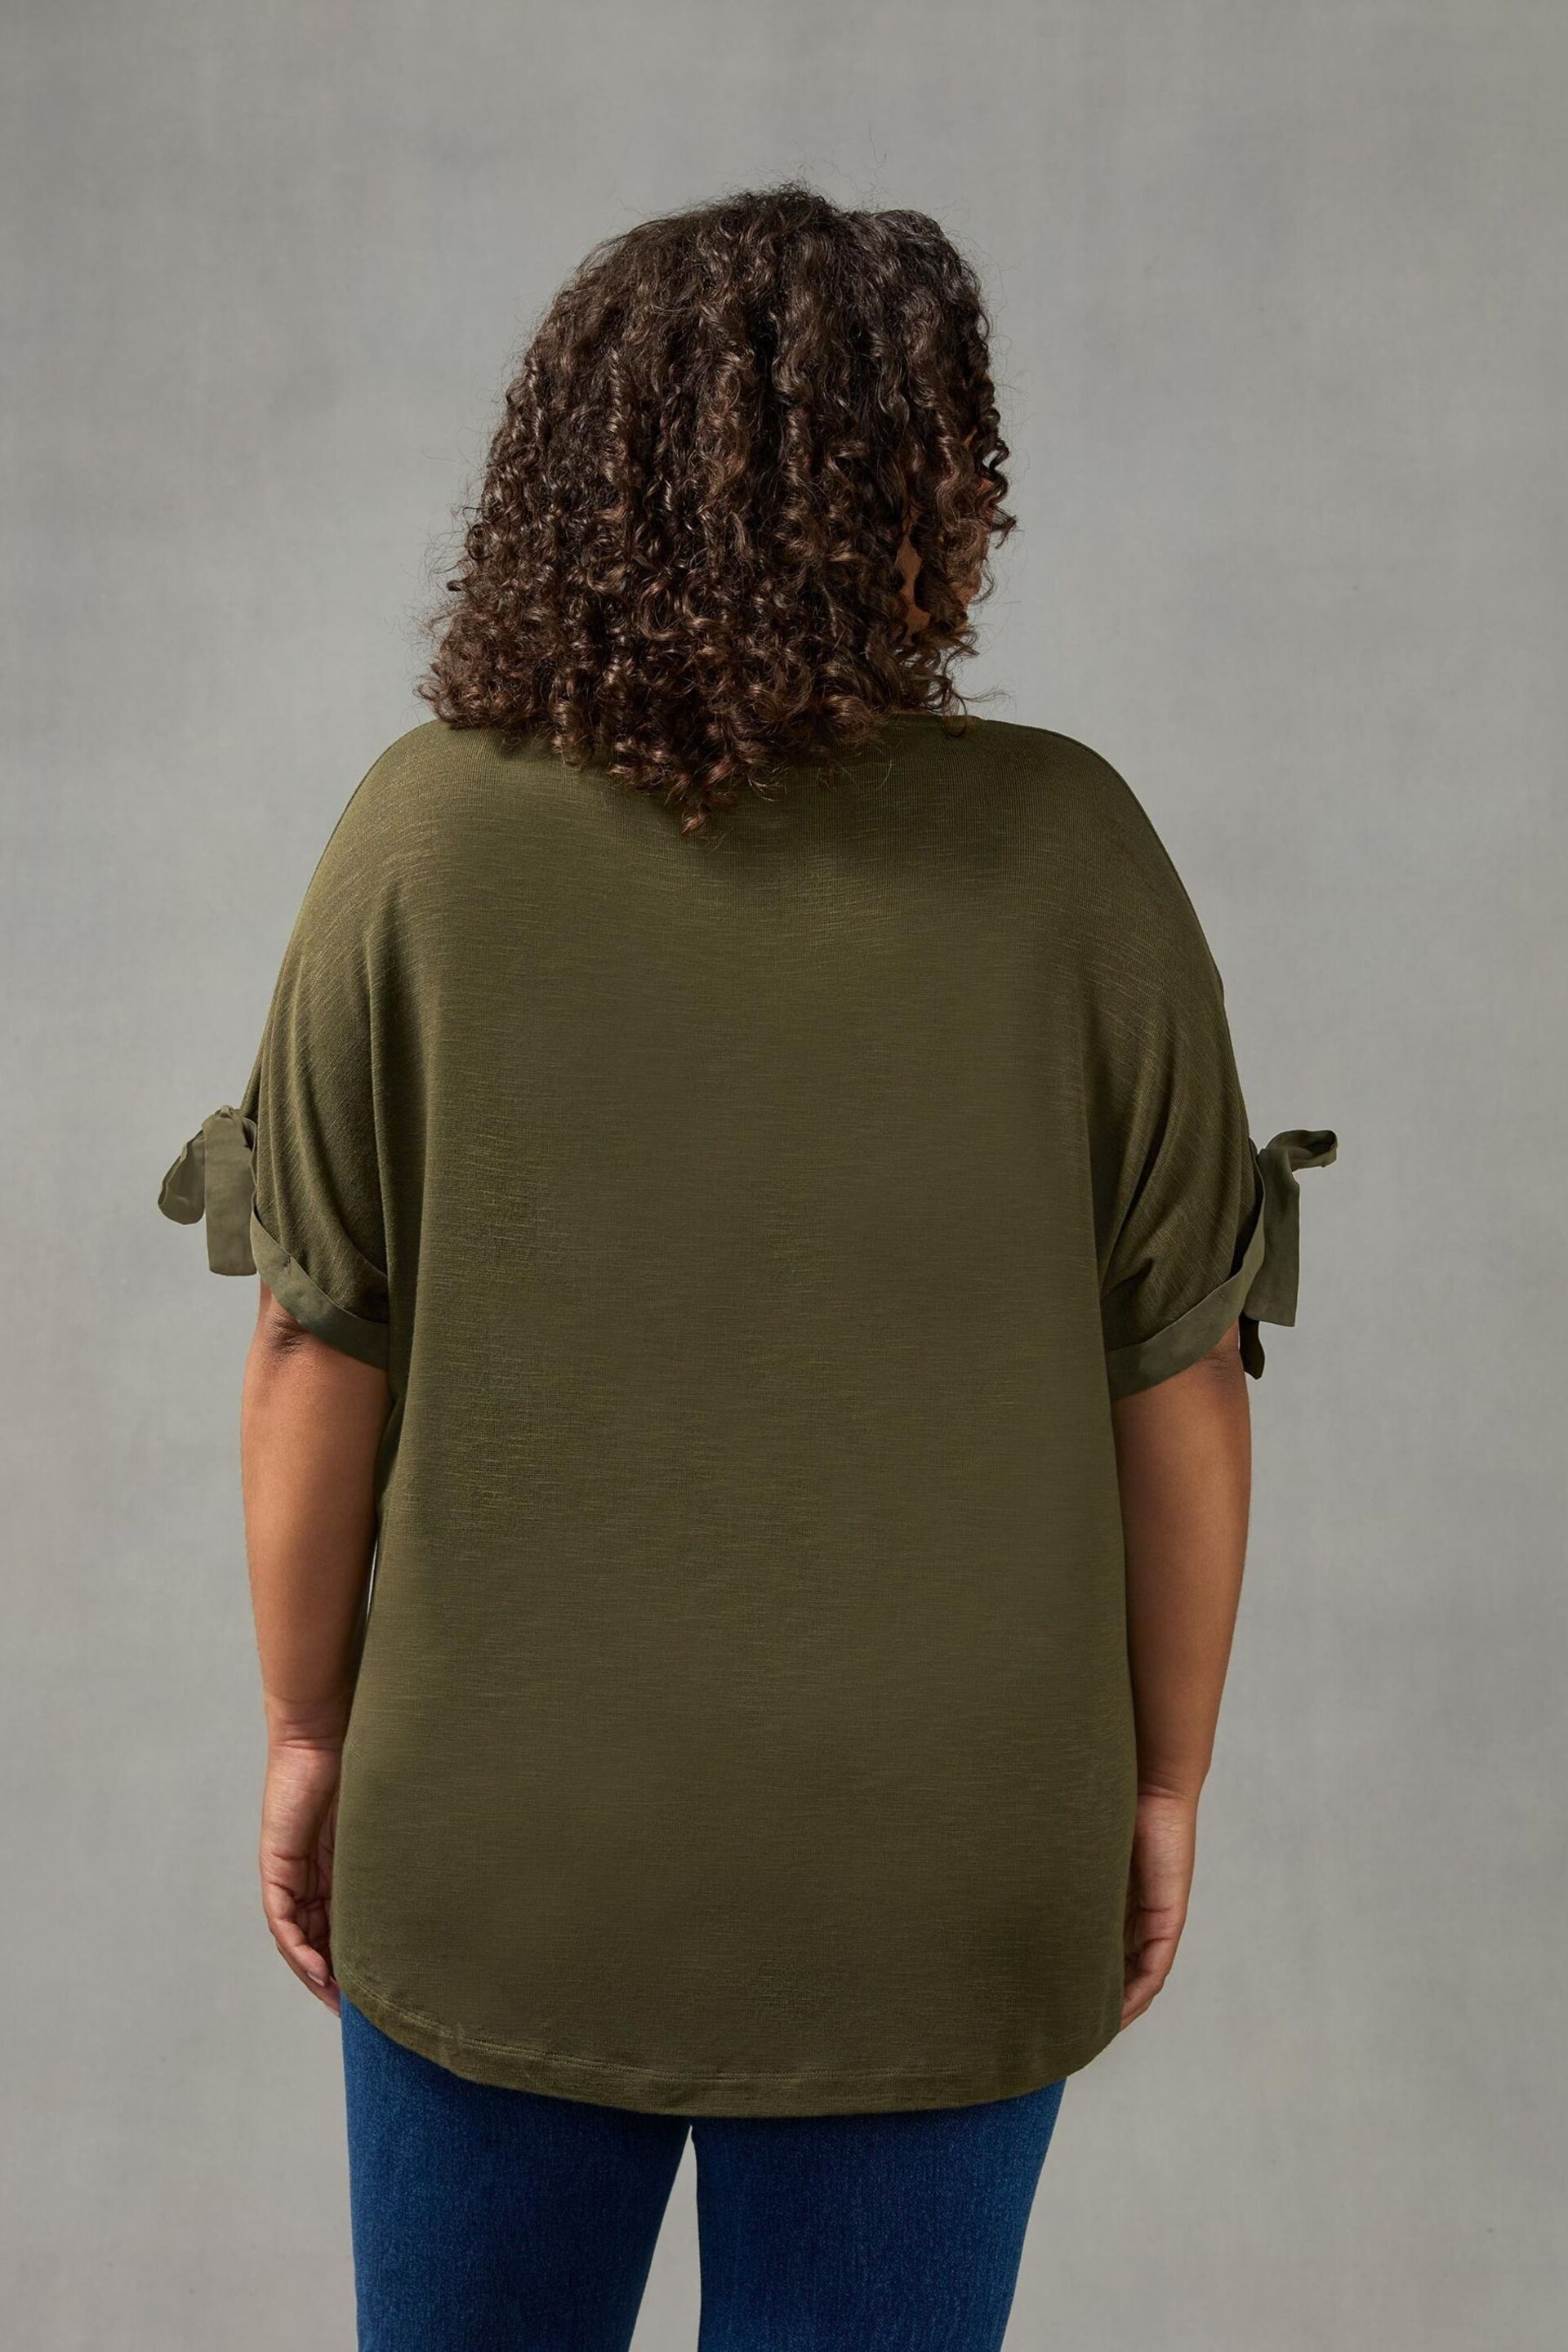 Live Unlimited Curve -Khaki Green Viscose Texture Tie Sleeve Top - Image 2 of 4